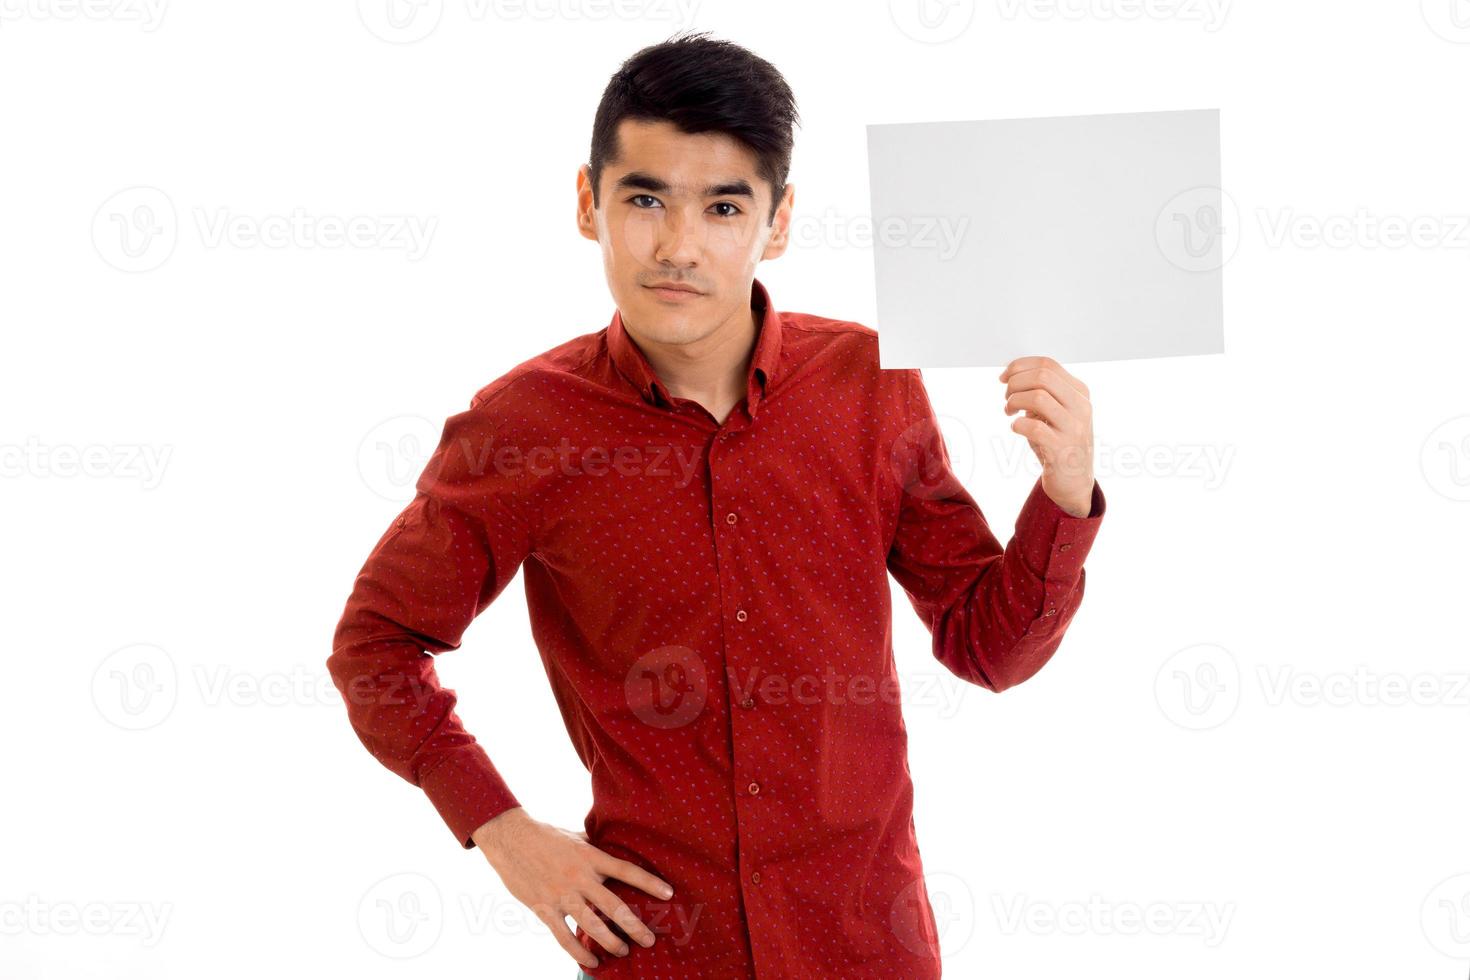 elegant young guy in red shirt with empty placard in hands posing isolated on white background photo